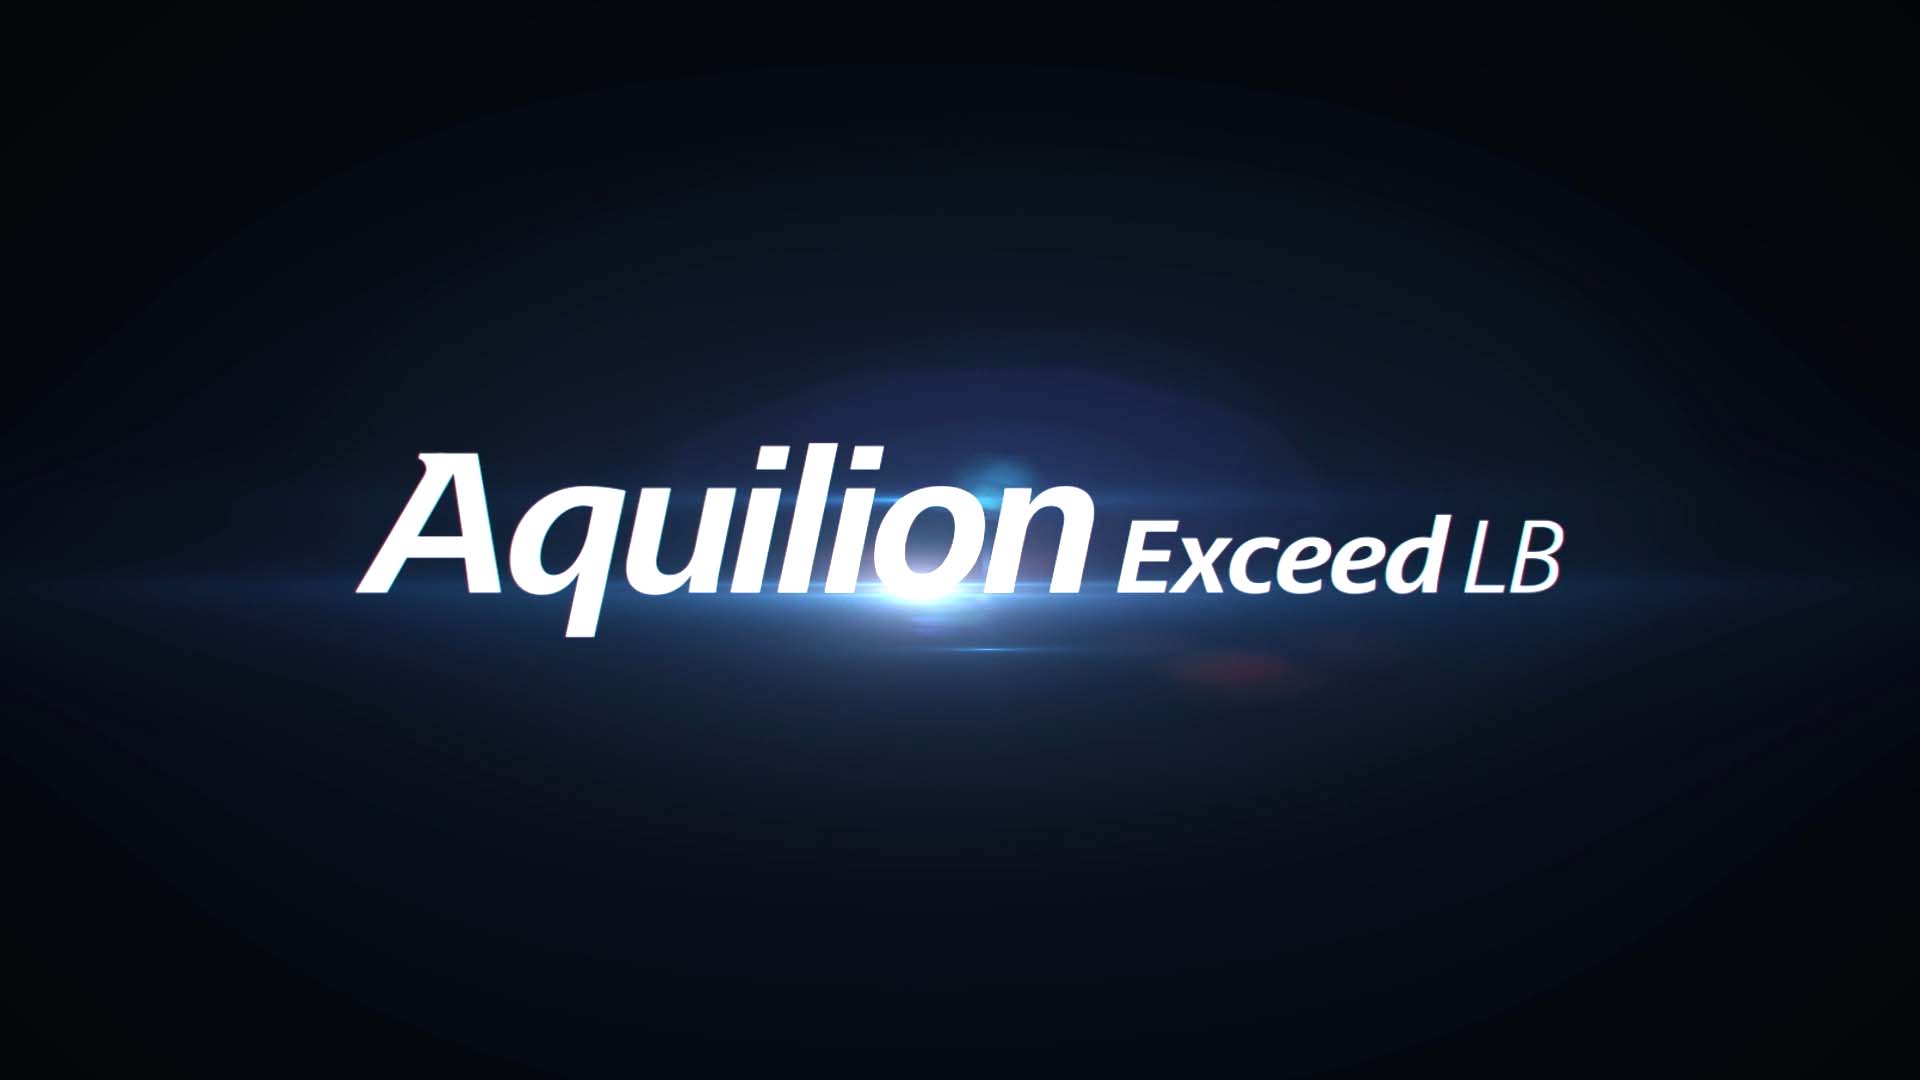 Aquilion Exceed LB